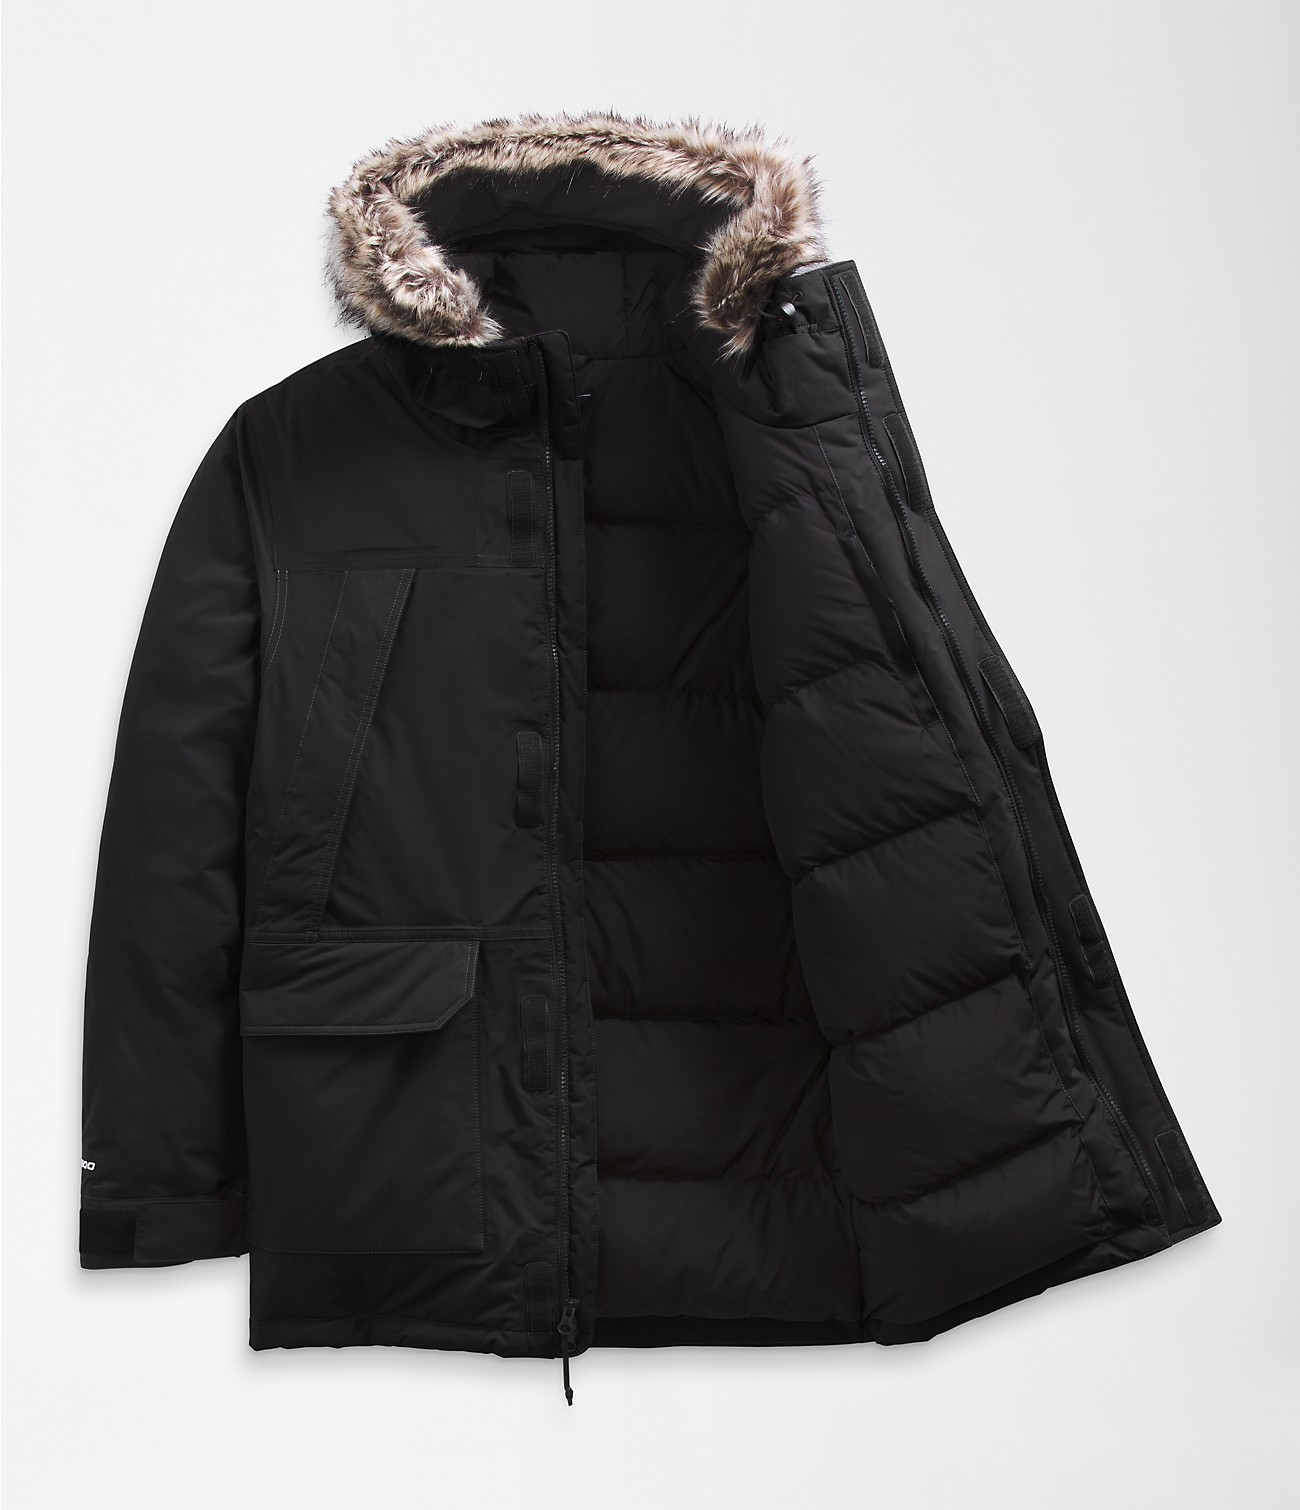 Unlock Wilderness' choice in the Geographical Norway Vs North Face comparison, the McMurdo Parka by The North Face